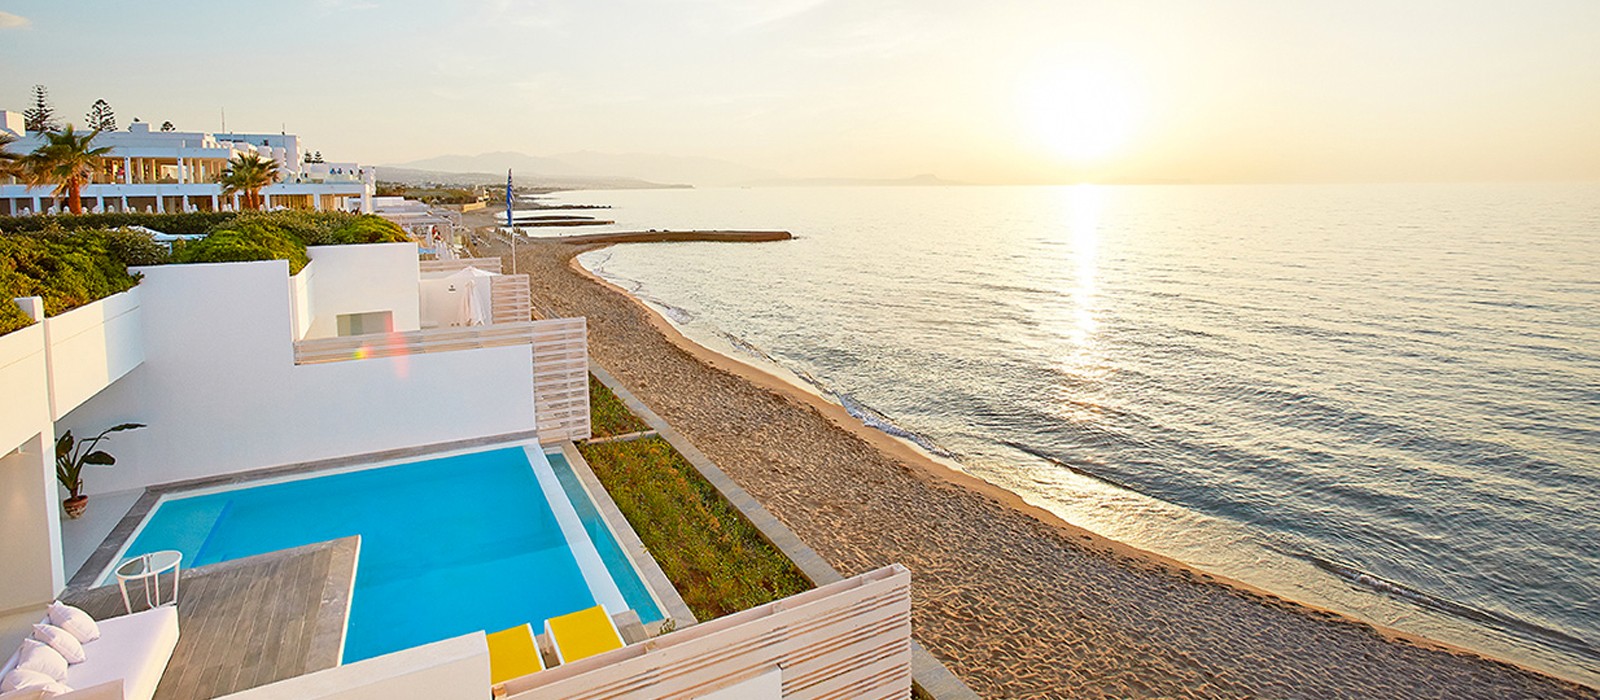 header - Grecotel White Palace Crete - Luxury Greece Holiday Packages